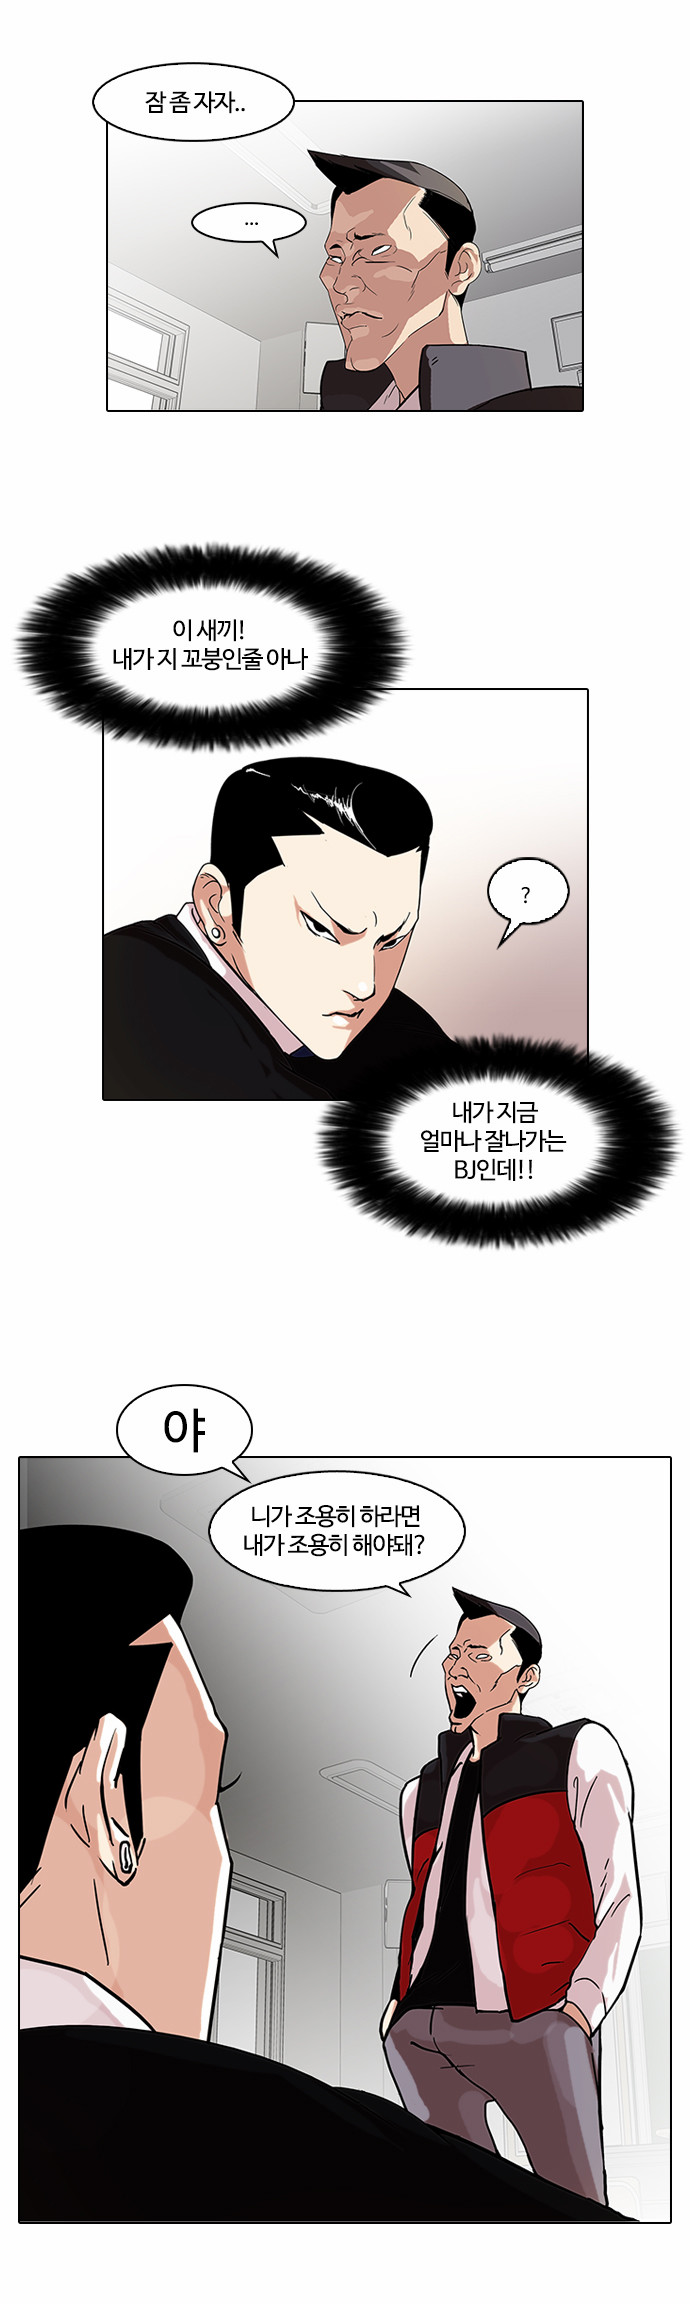 Lookism - Chapter 64 - Page 8